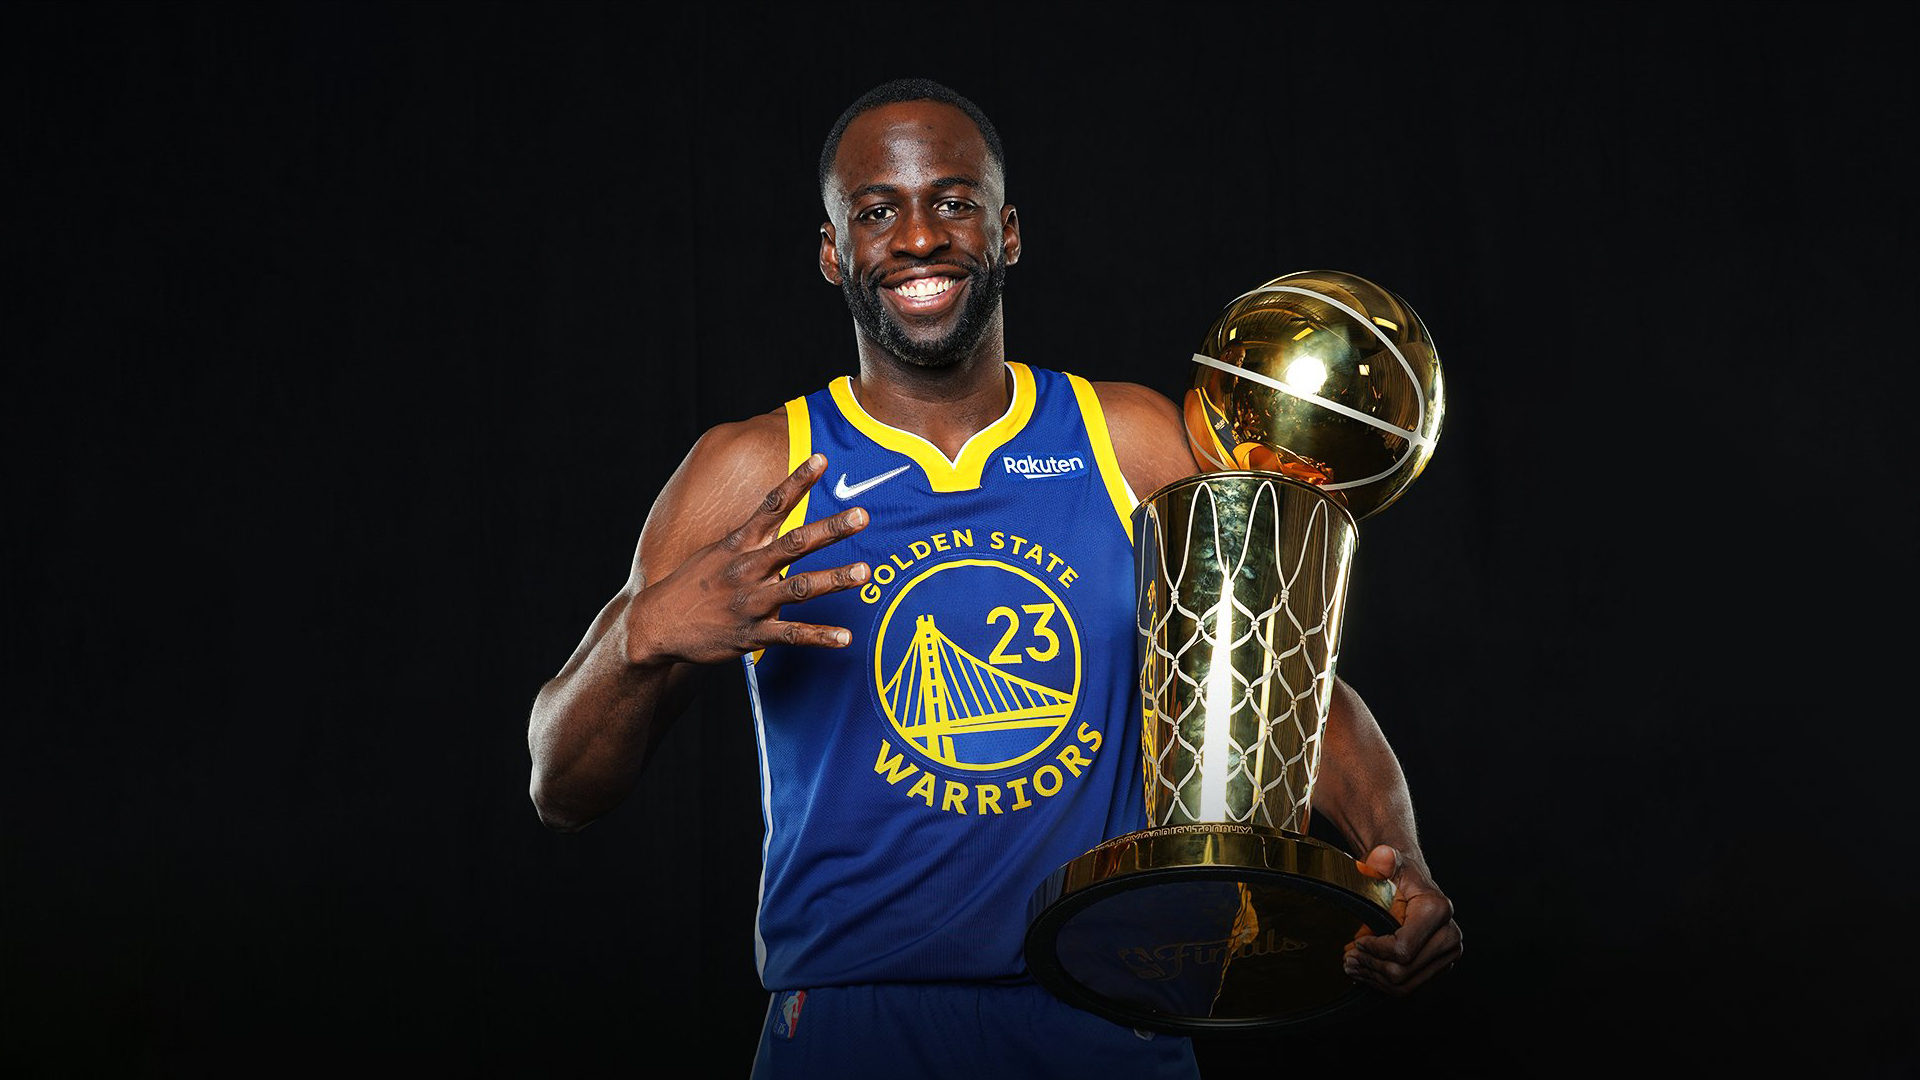 Draymond Green NBA 2022 Champion Wallpaper, HD Sports 4K Wallpapers, Images  and Background - Wallpapers Den